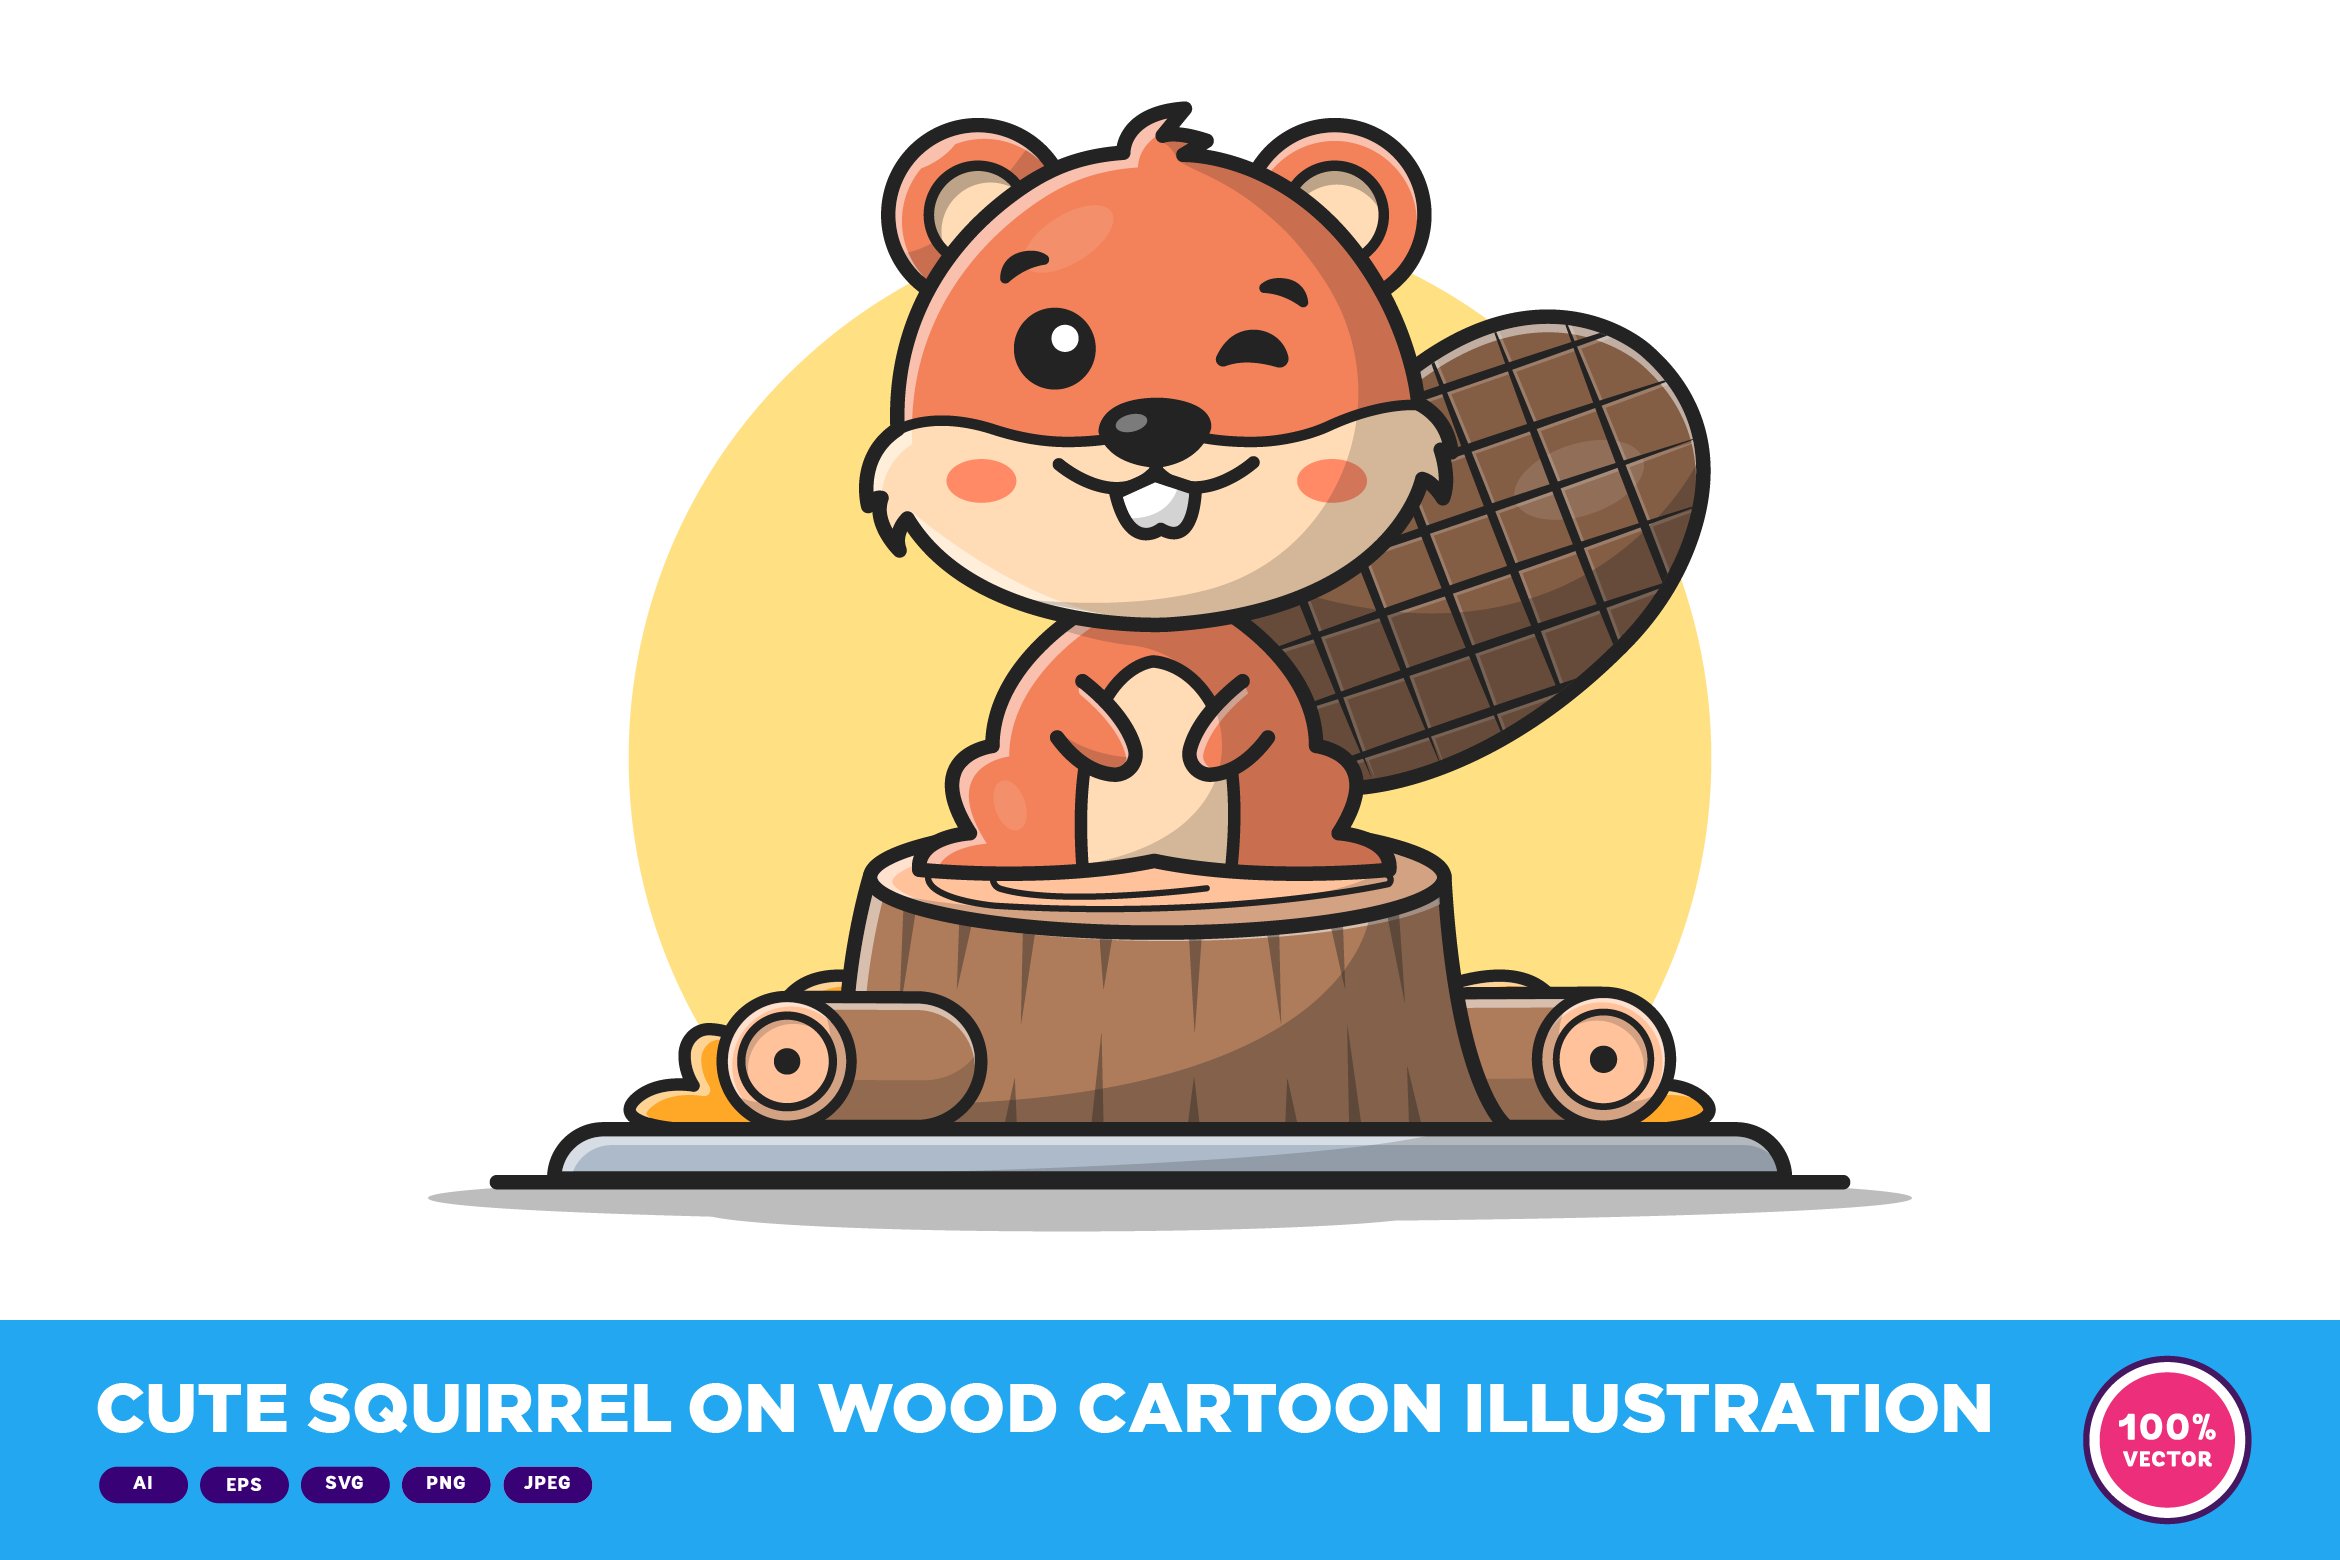 Cute Squirrel On Wood Cartoon cover image.